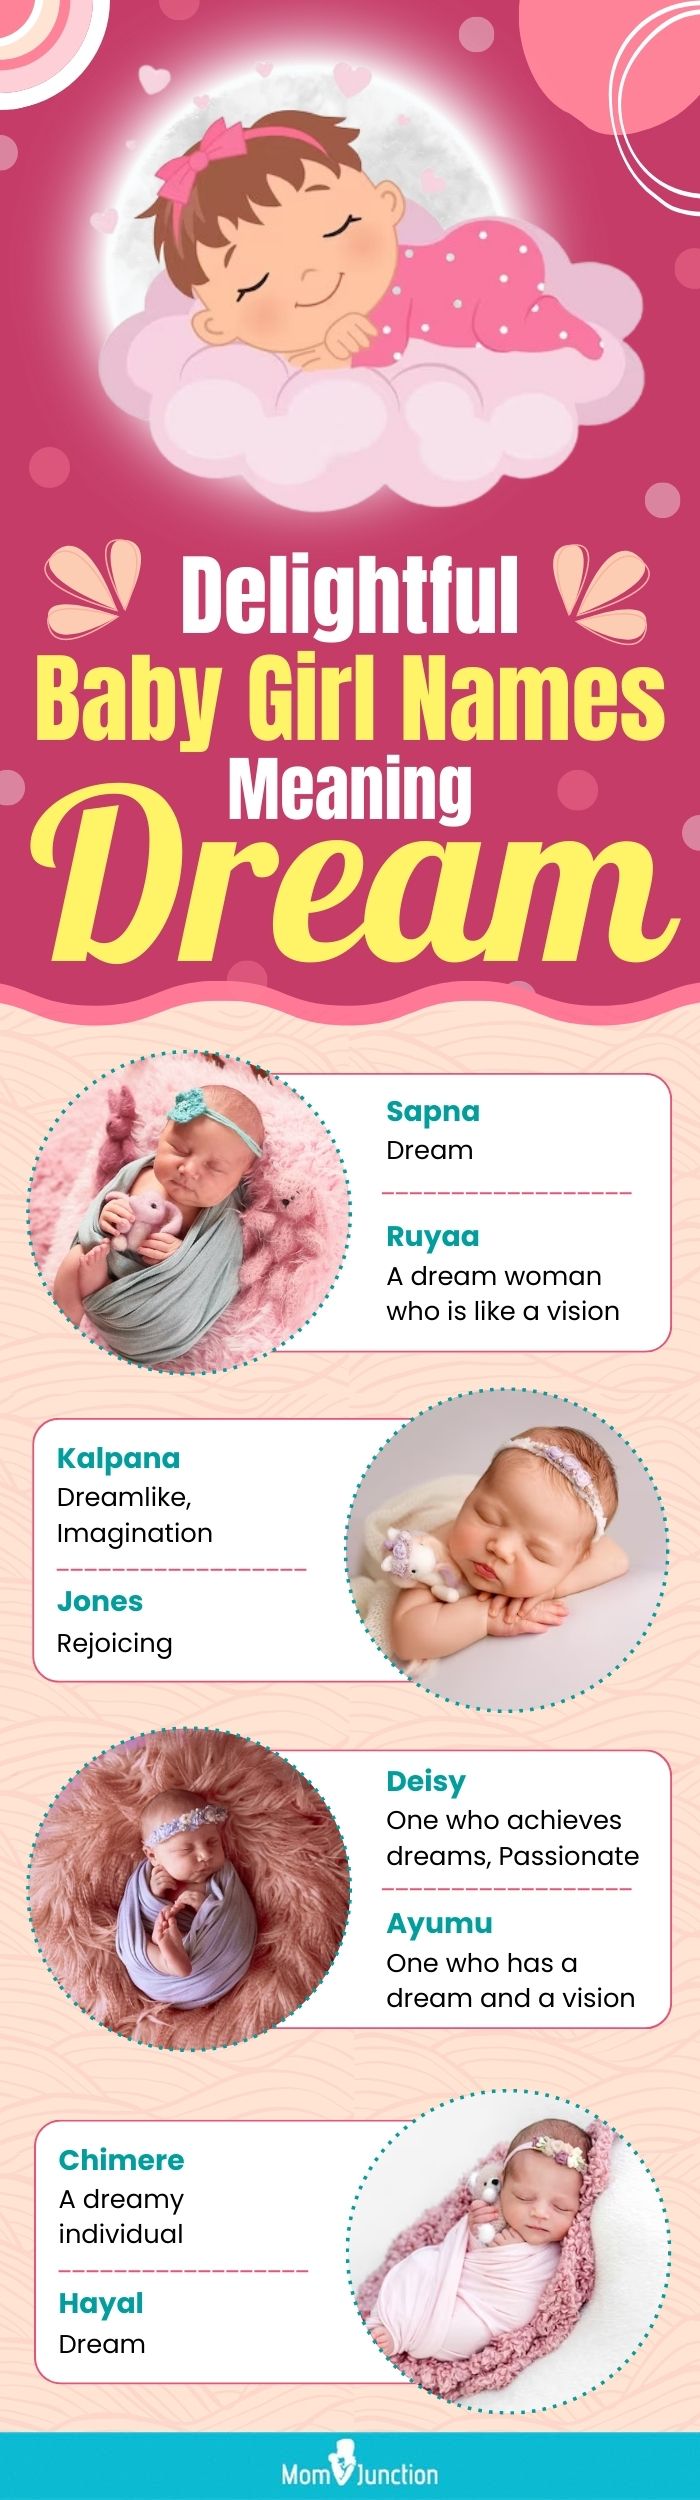 delightful baby girl names meaning dream (infographic)